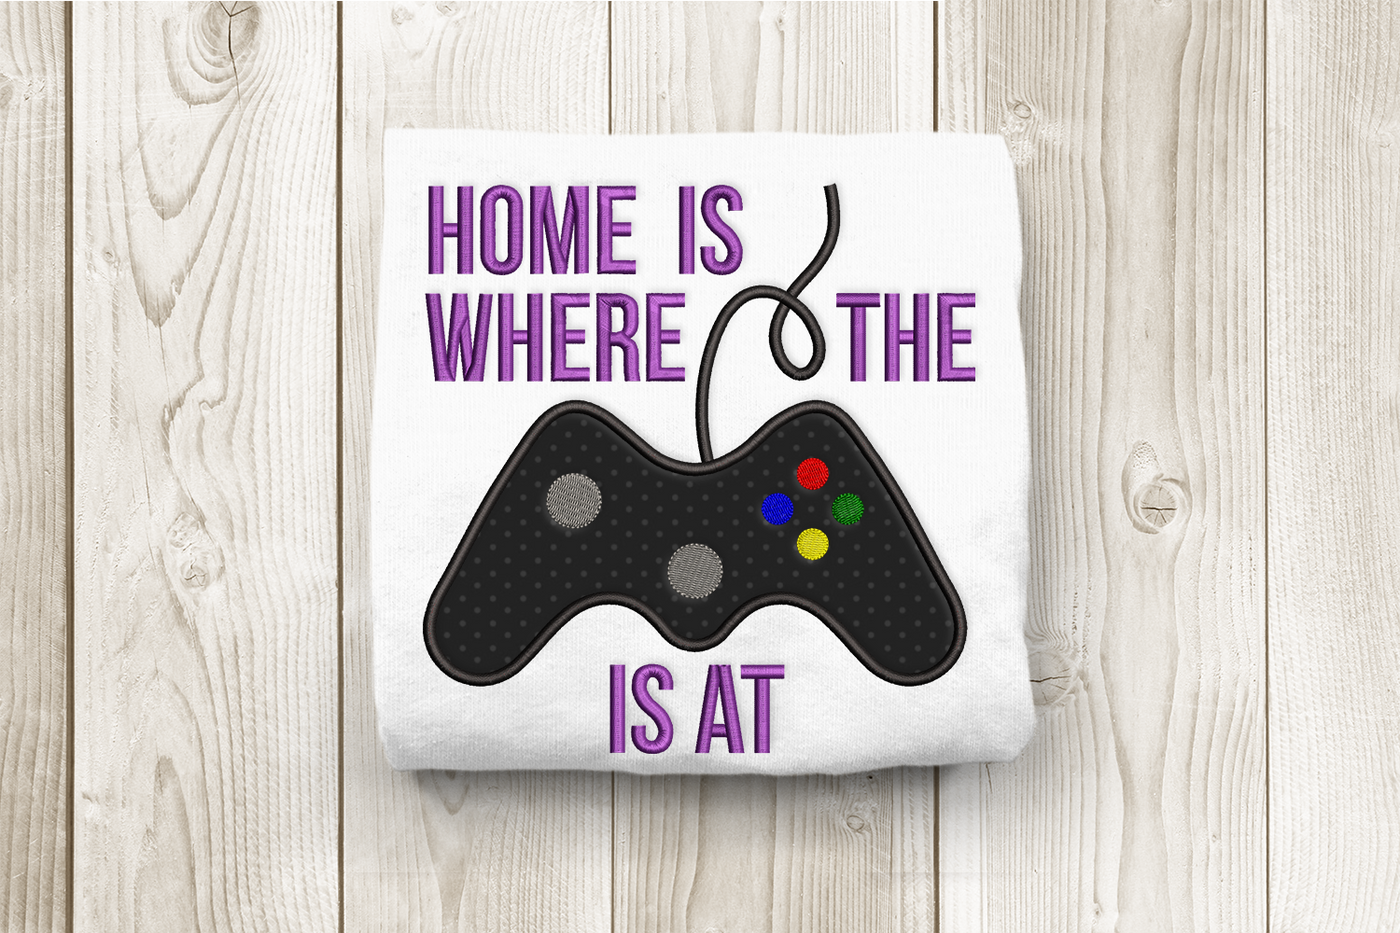 Home is where the game system is at applique